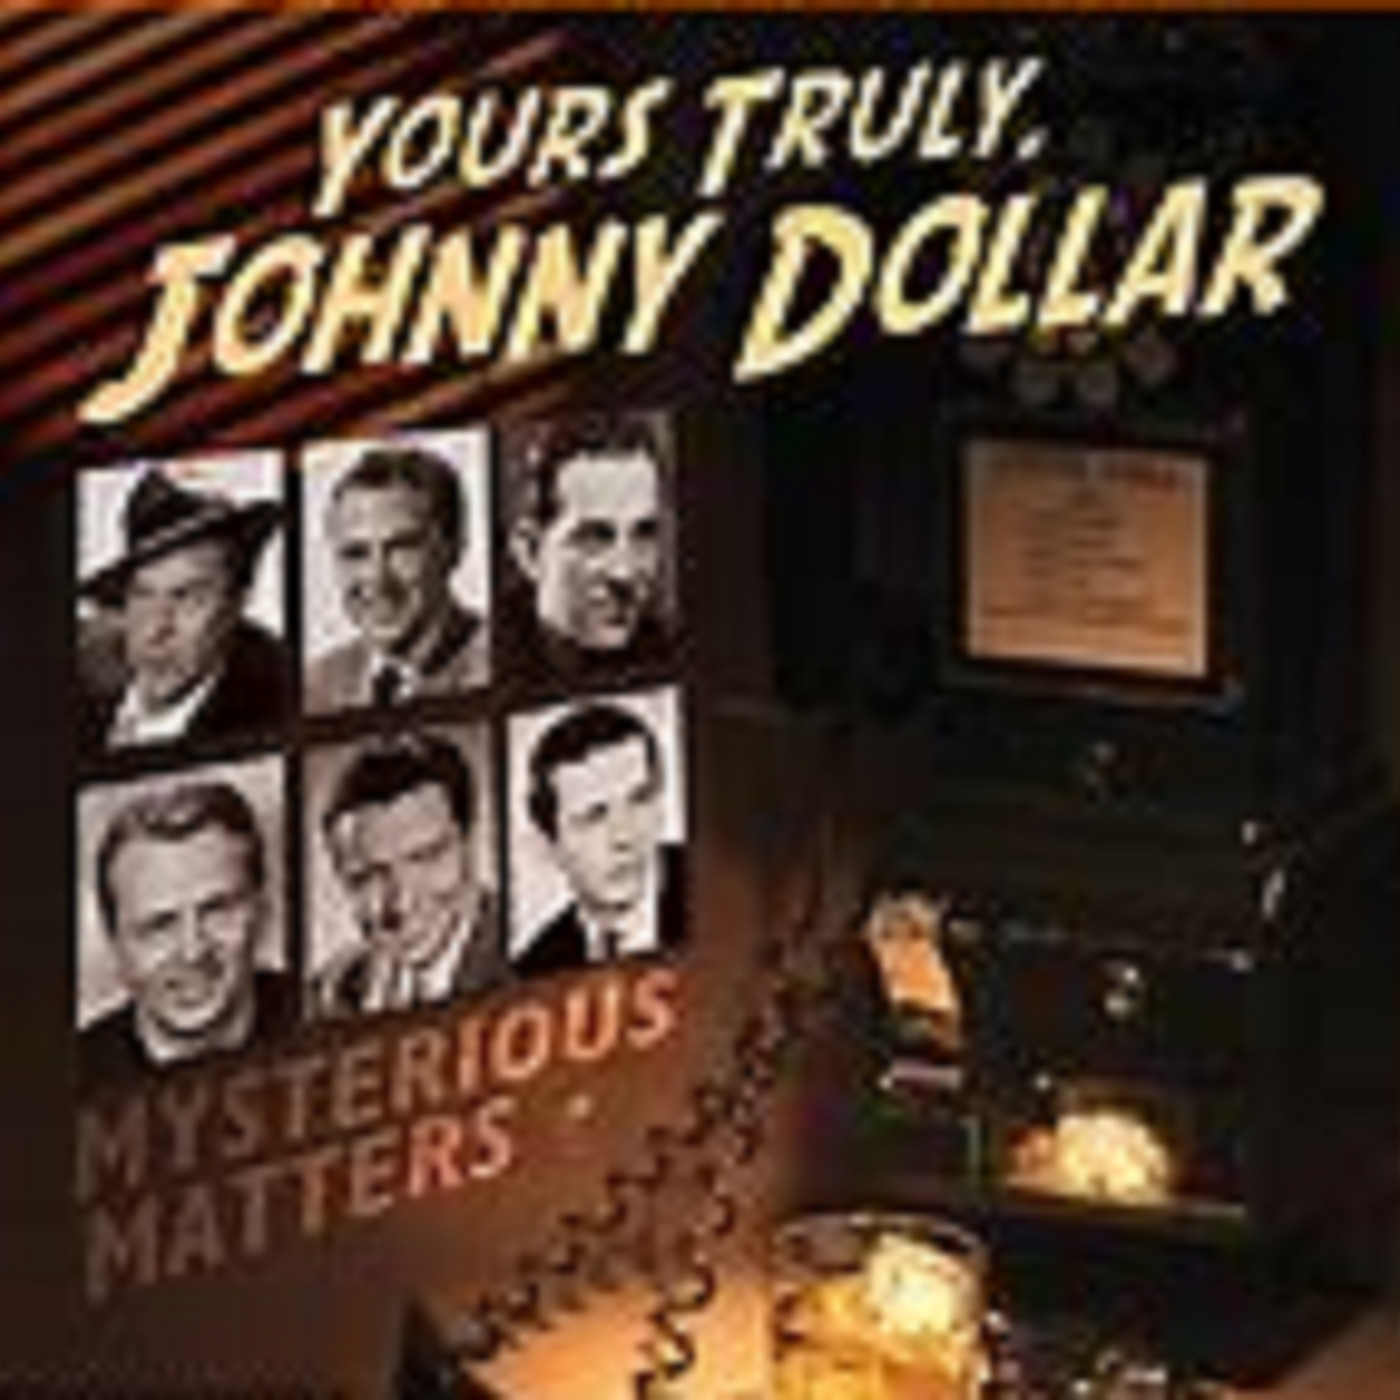 Yours Truly, Johnny Dollar - 031862, episode 783 - The Ike and Mike Matter